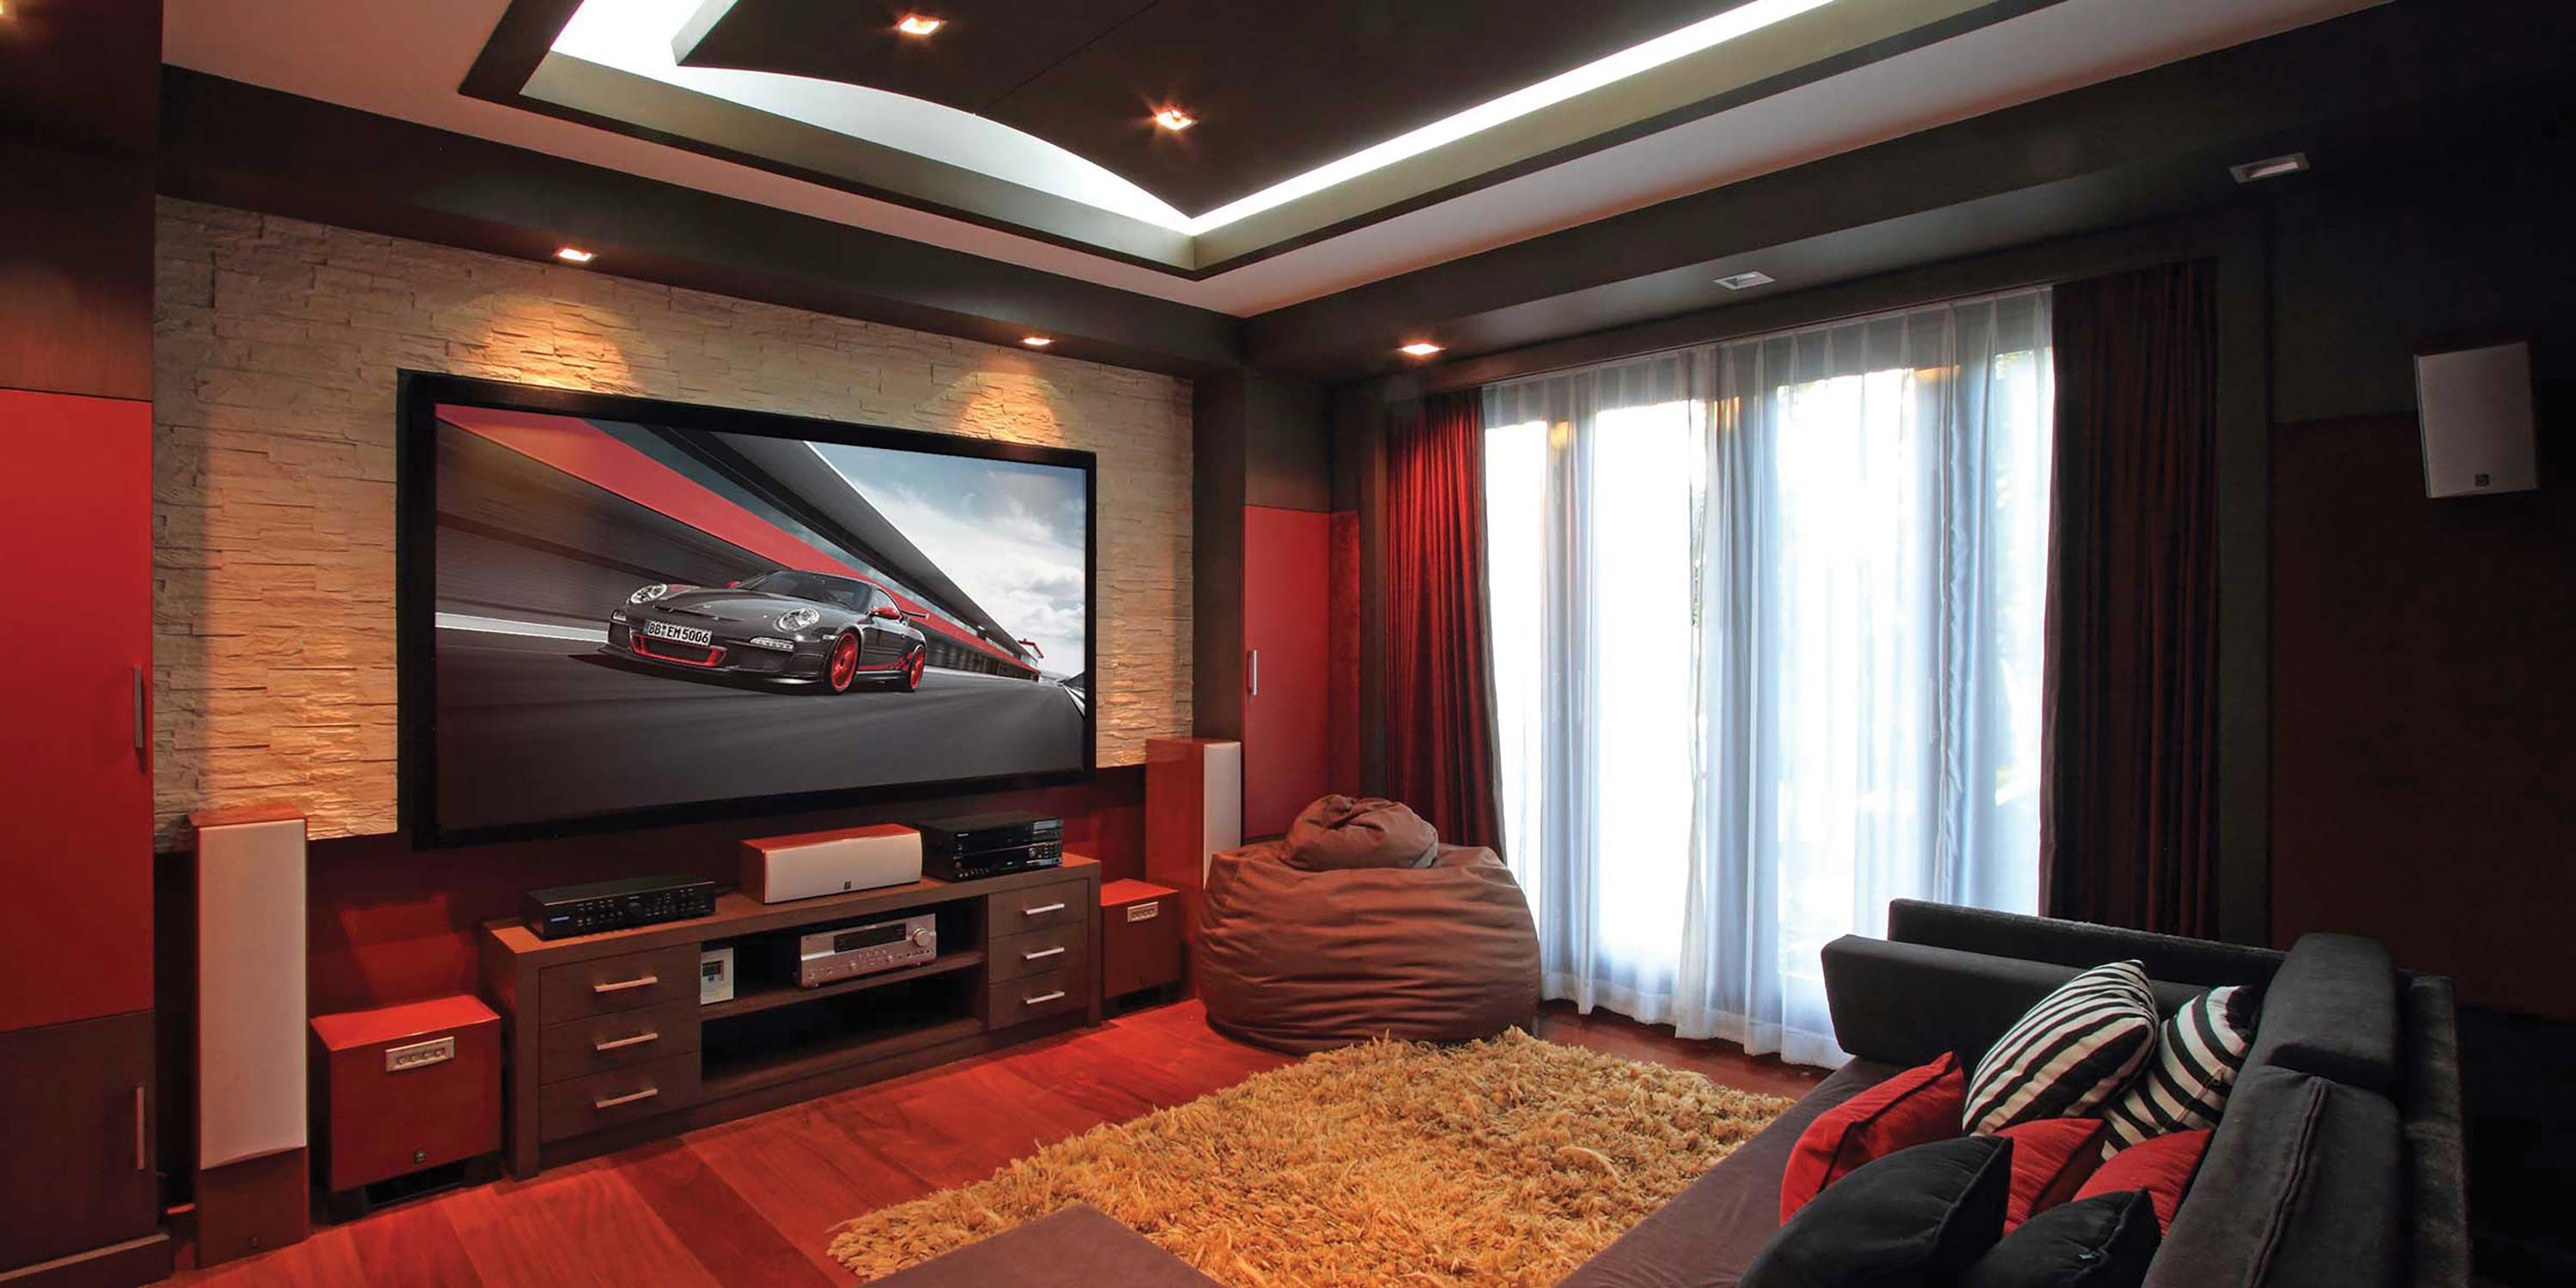 Large screen, red room, media room, car on tv